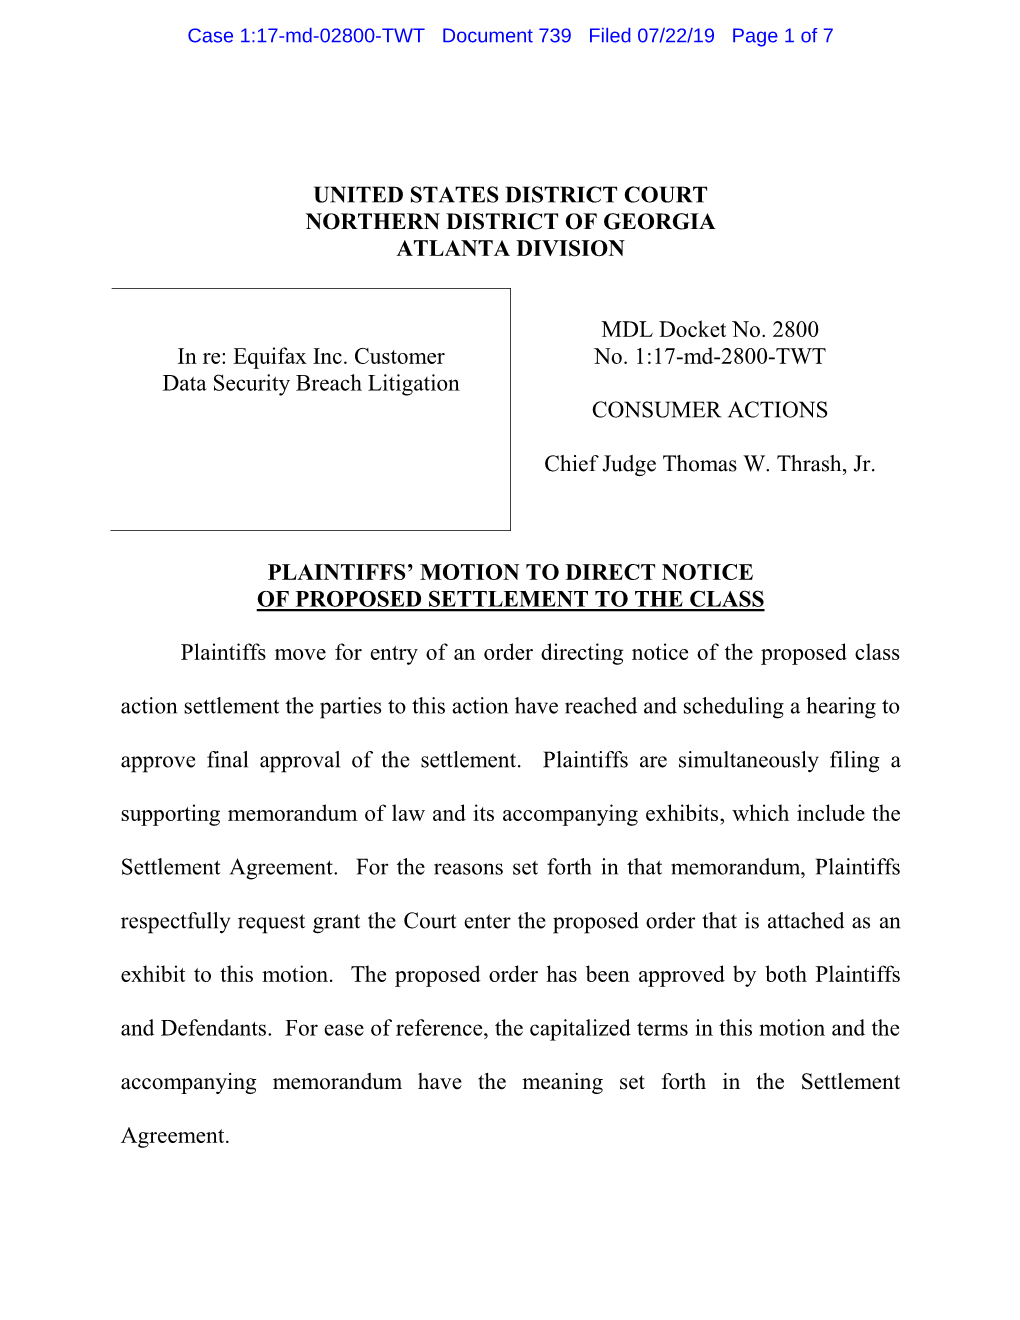 Case 1:17-Md-02800-TWT Document 739 Filed 07/22/19 Page 1 of 7